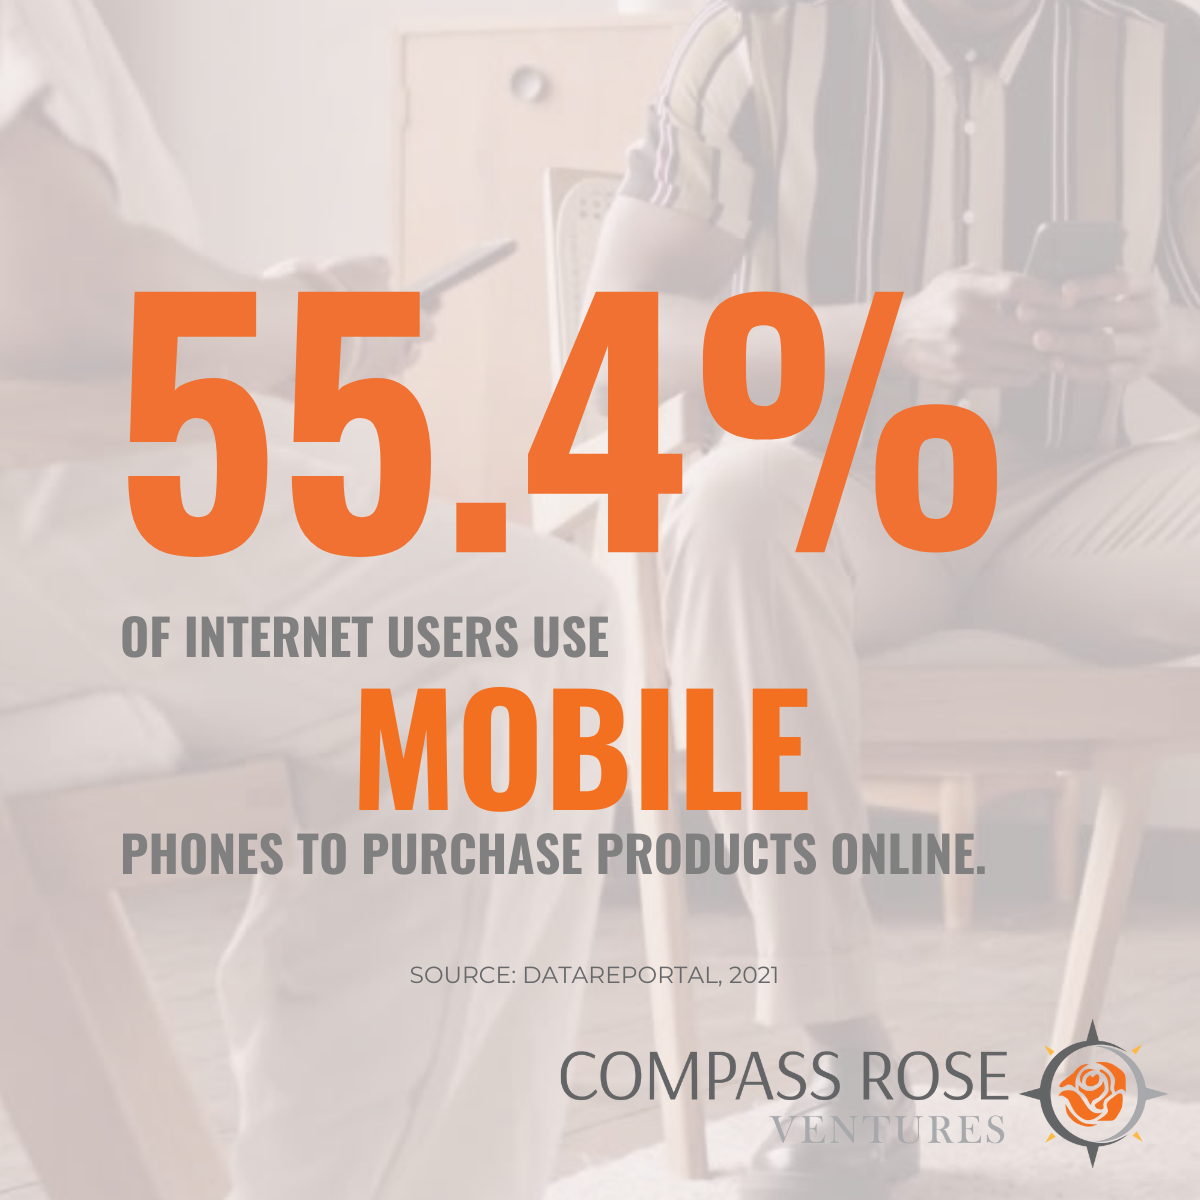 Converting Digital Content into Sales for Mobile